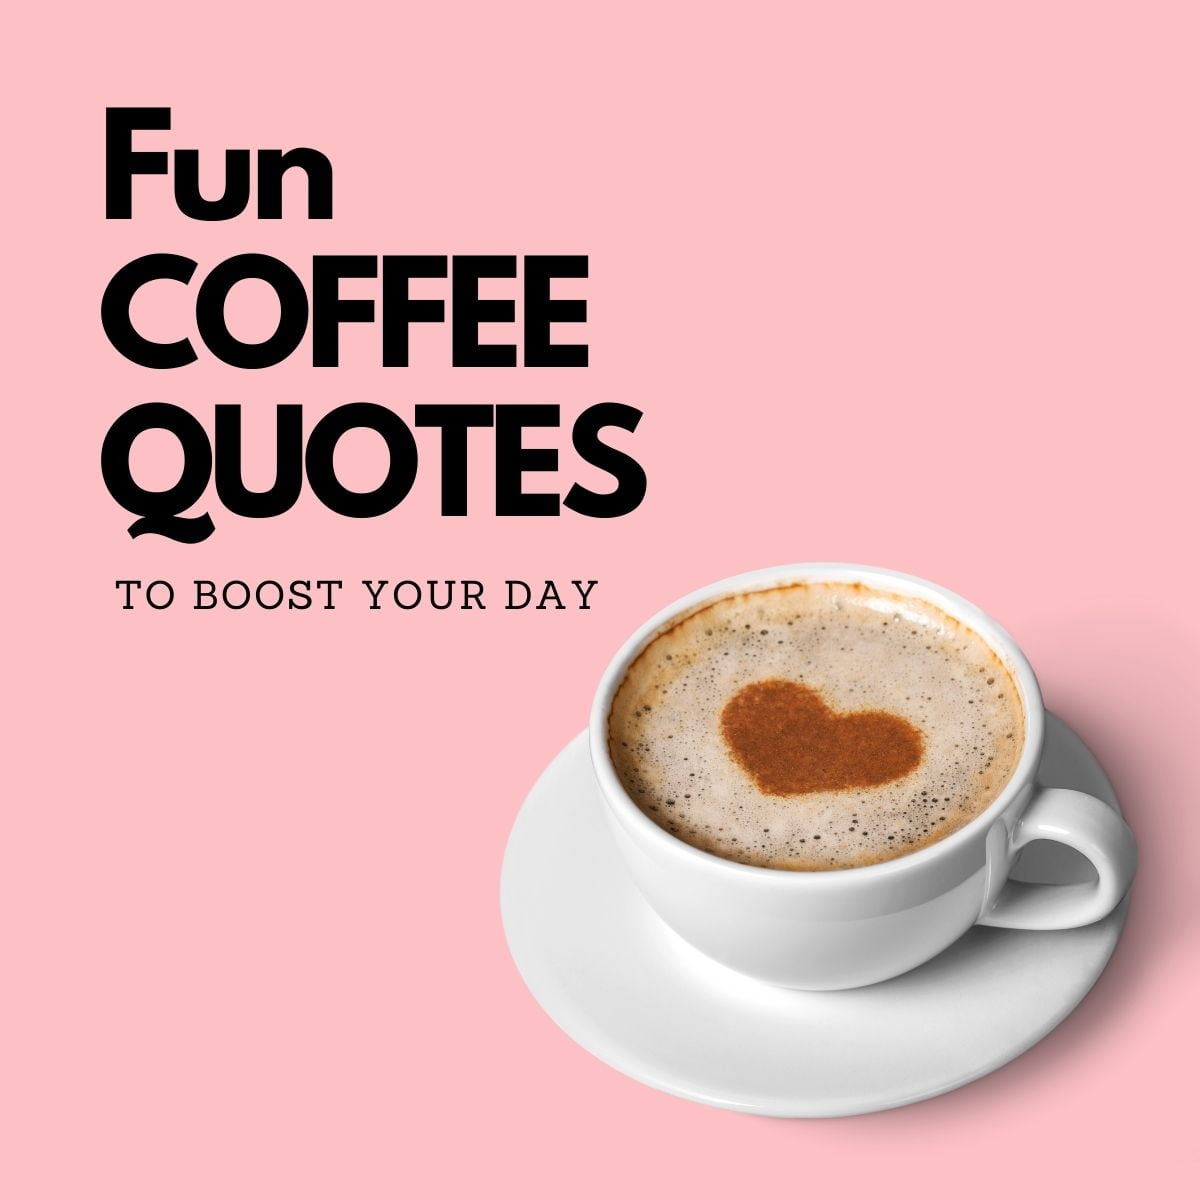 35 Fun Coffee Quotes to Boost Your Day